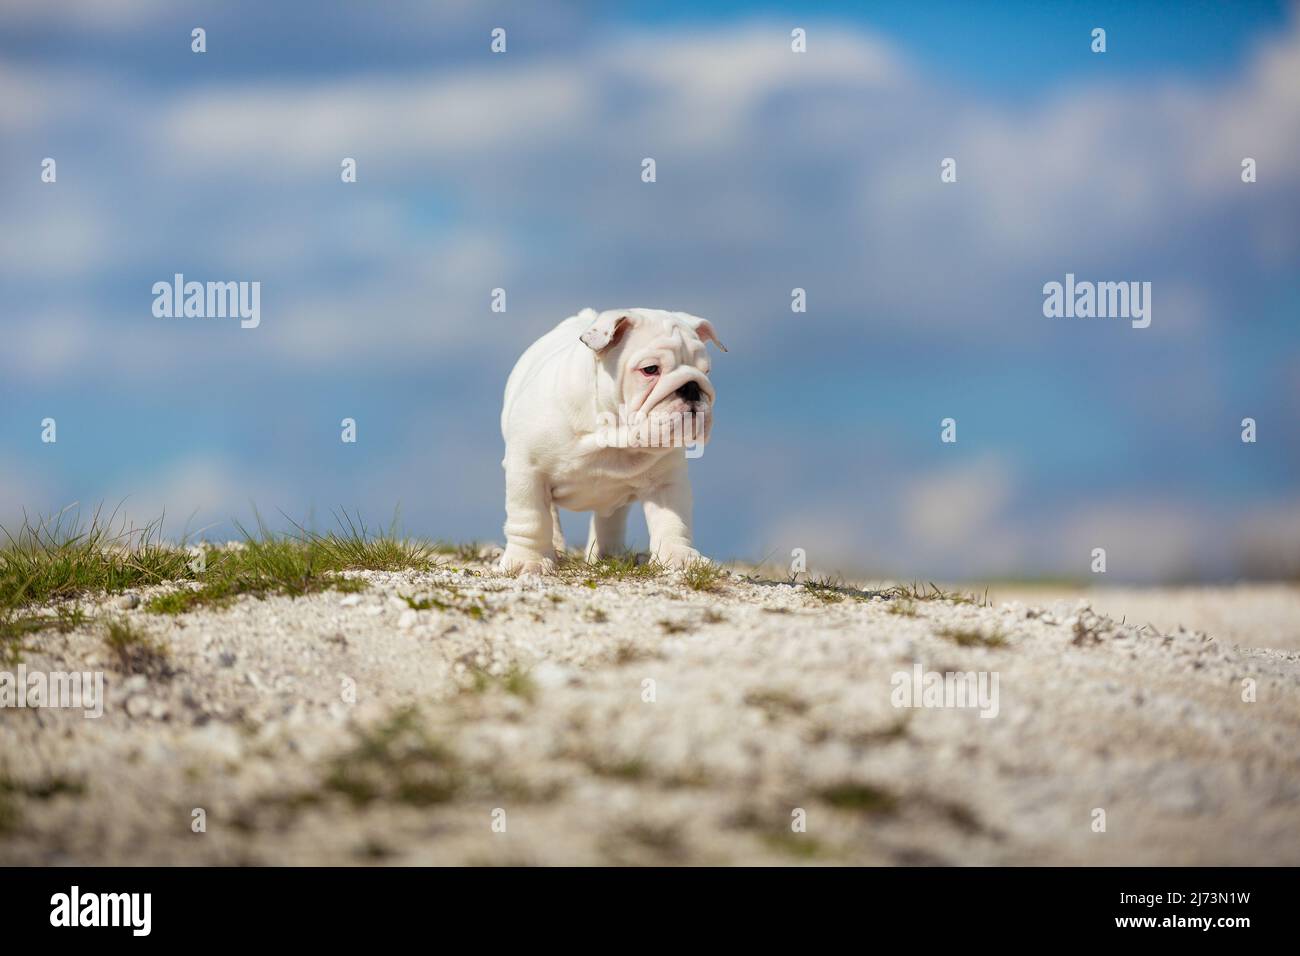 Small white English Bulldog. Puppy against a bright blue sky outdoors. Stock Photo